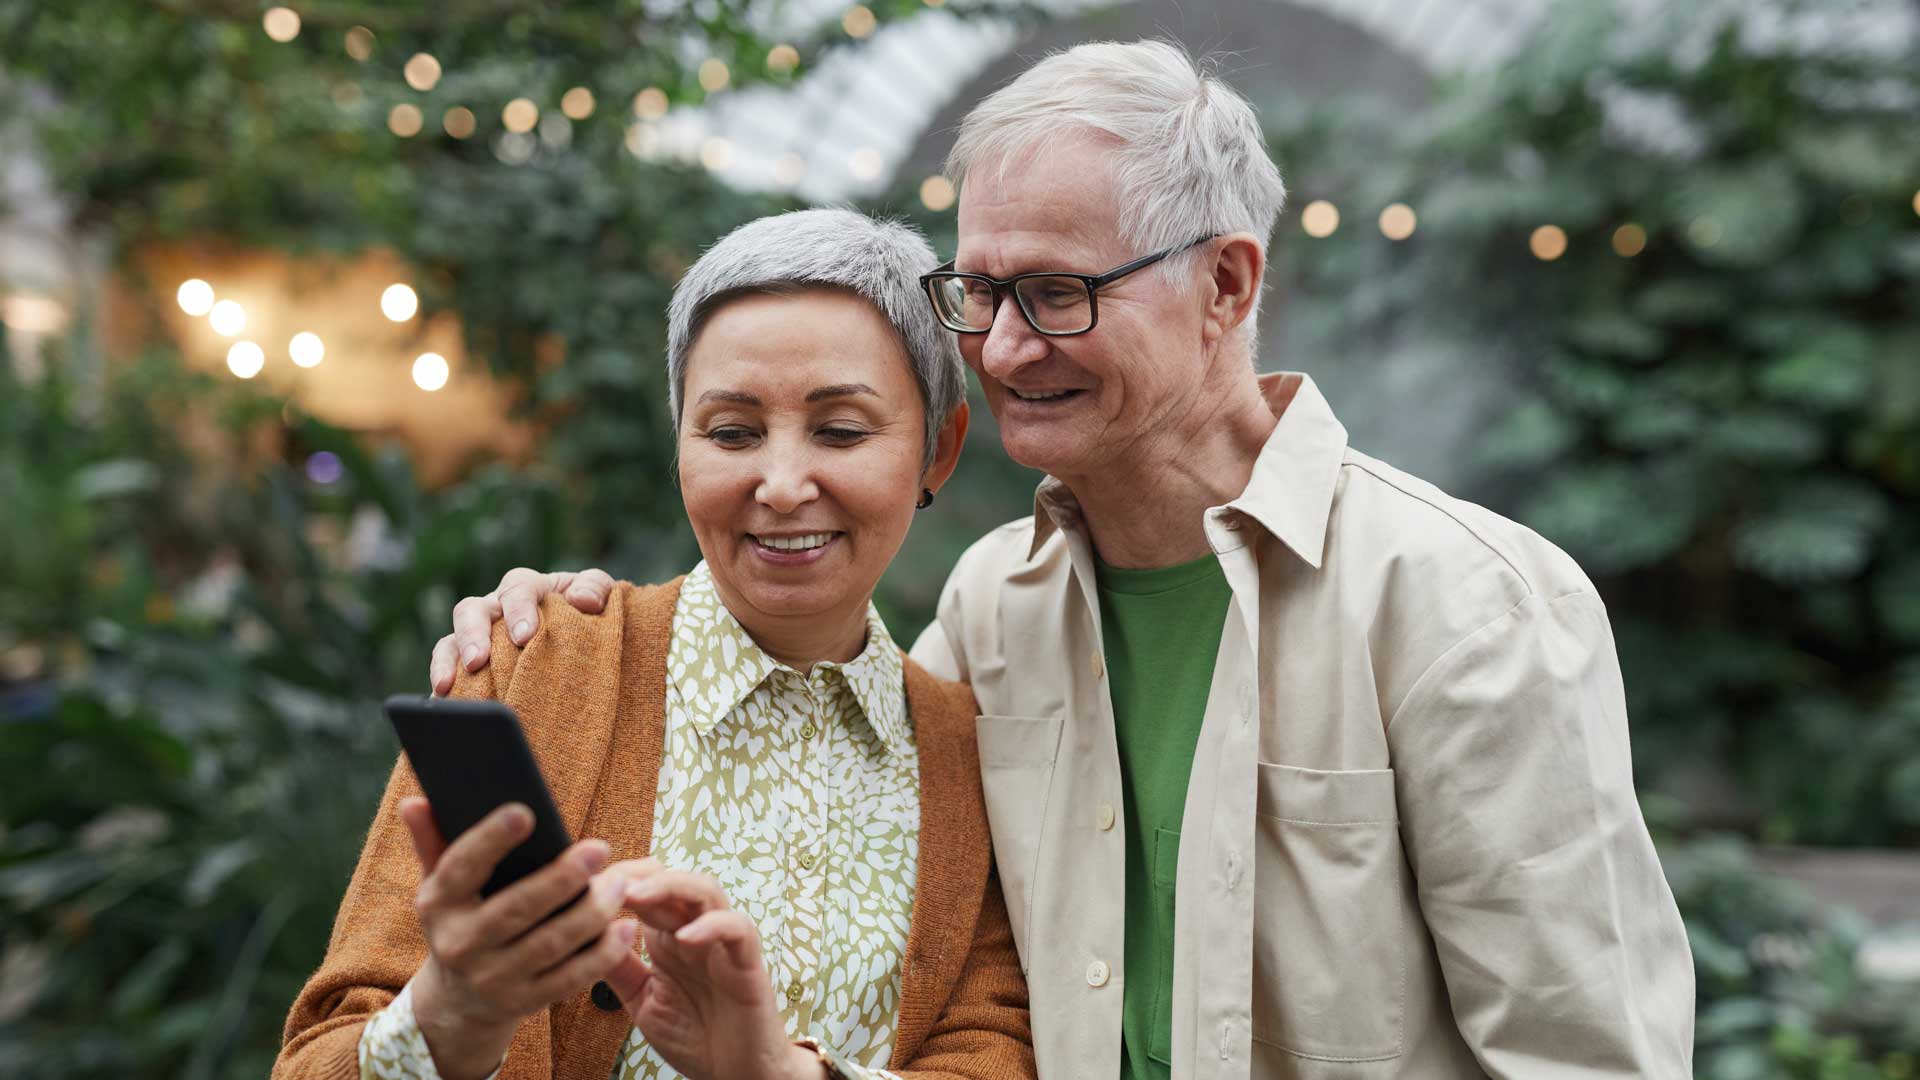 Two elderly smiling and looking at phone together